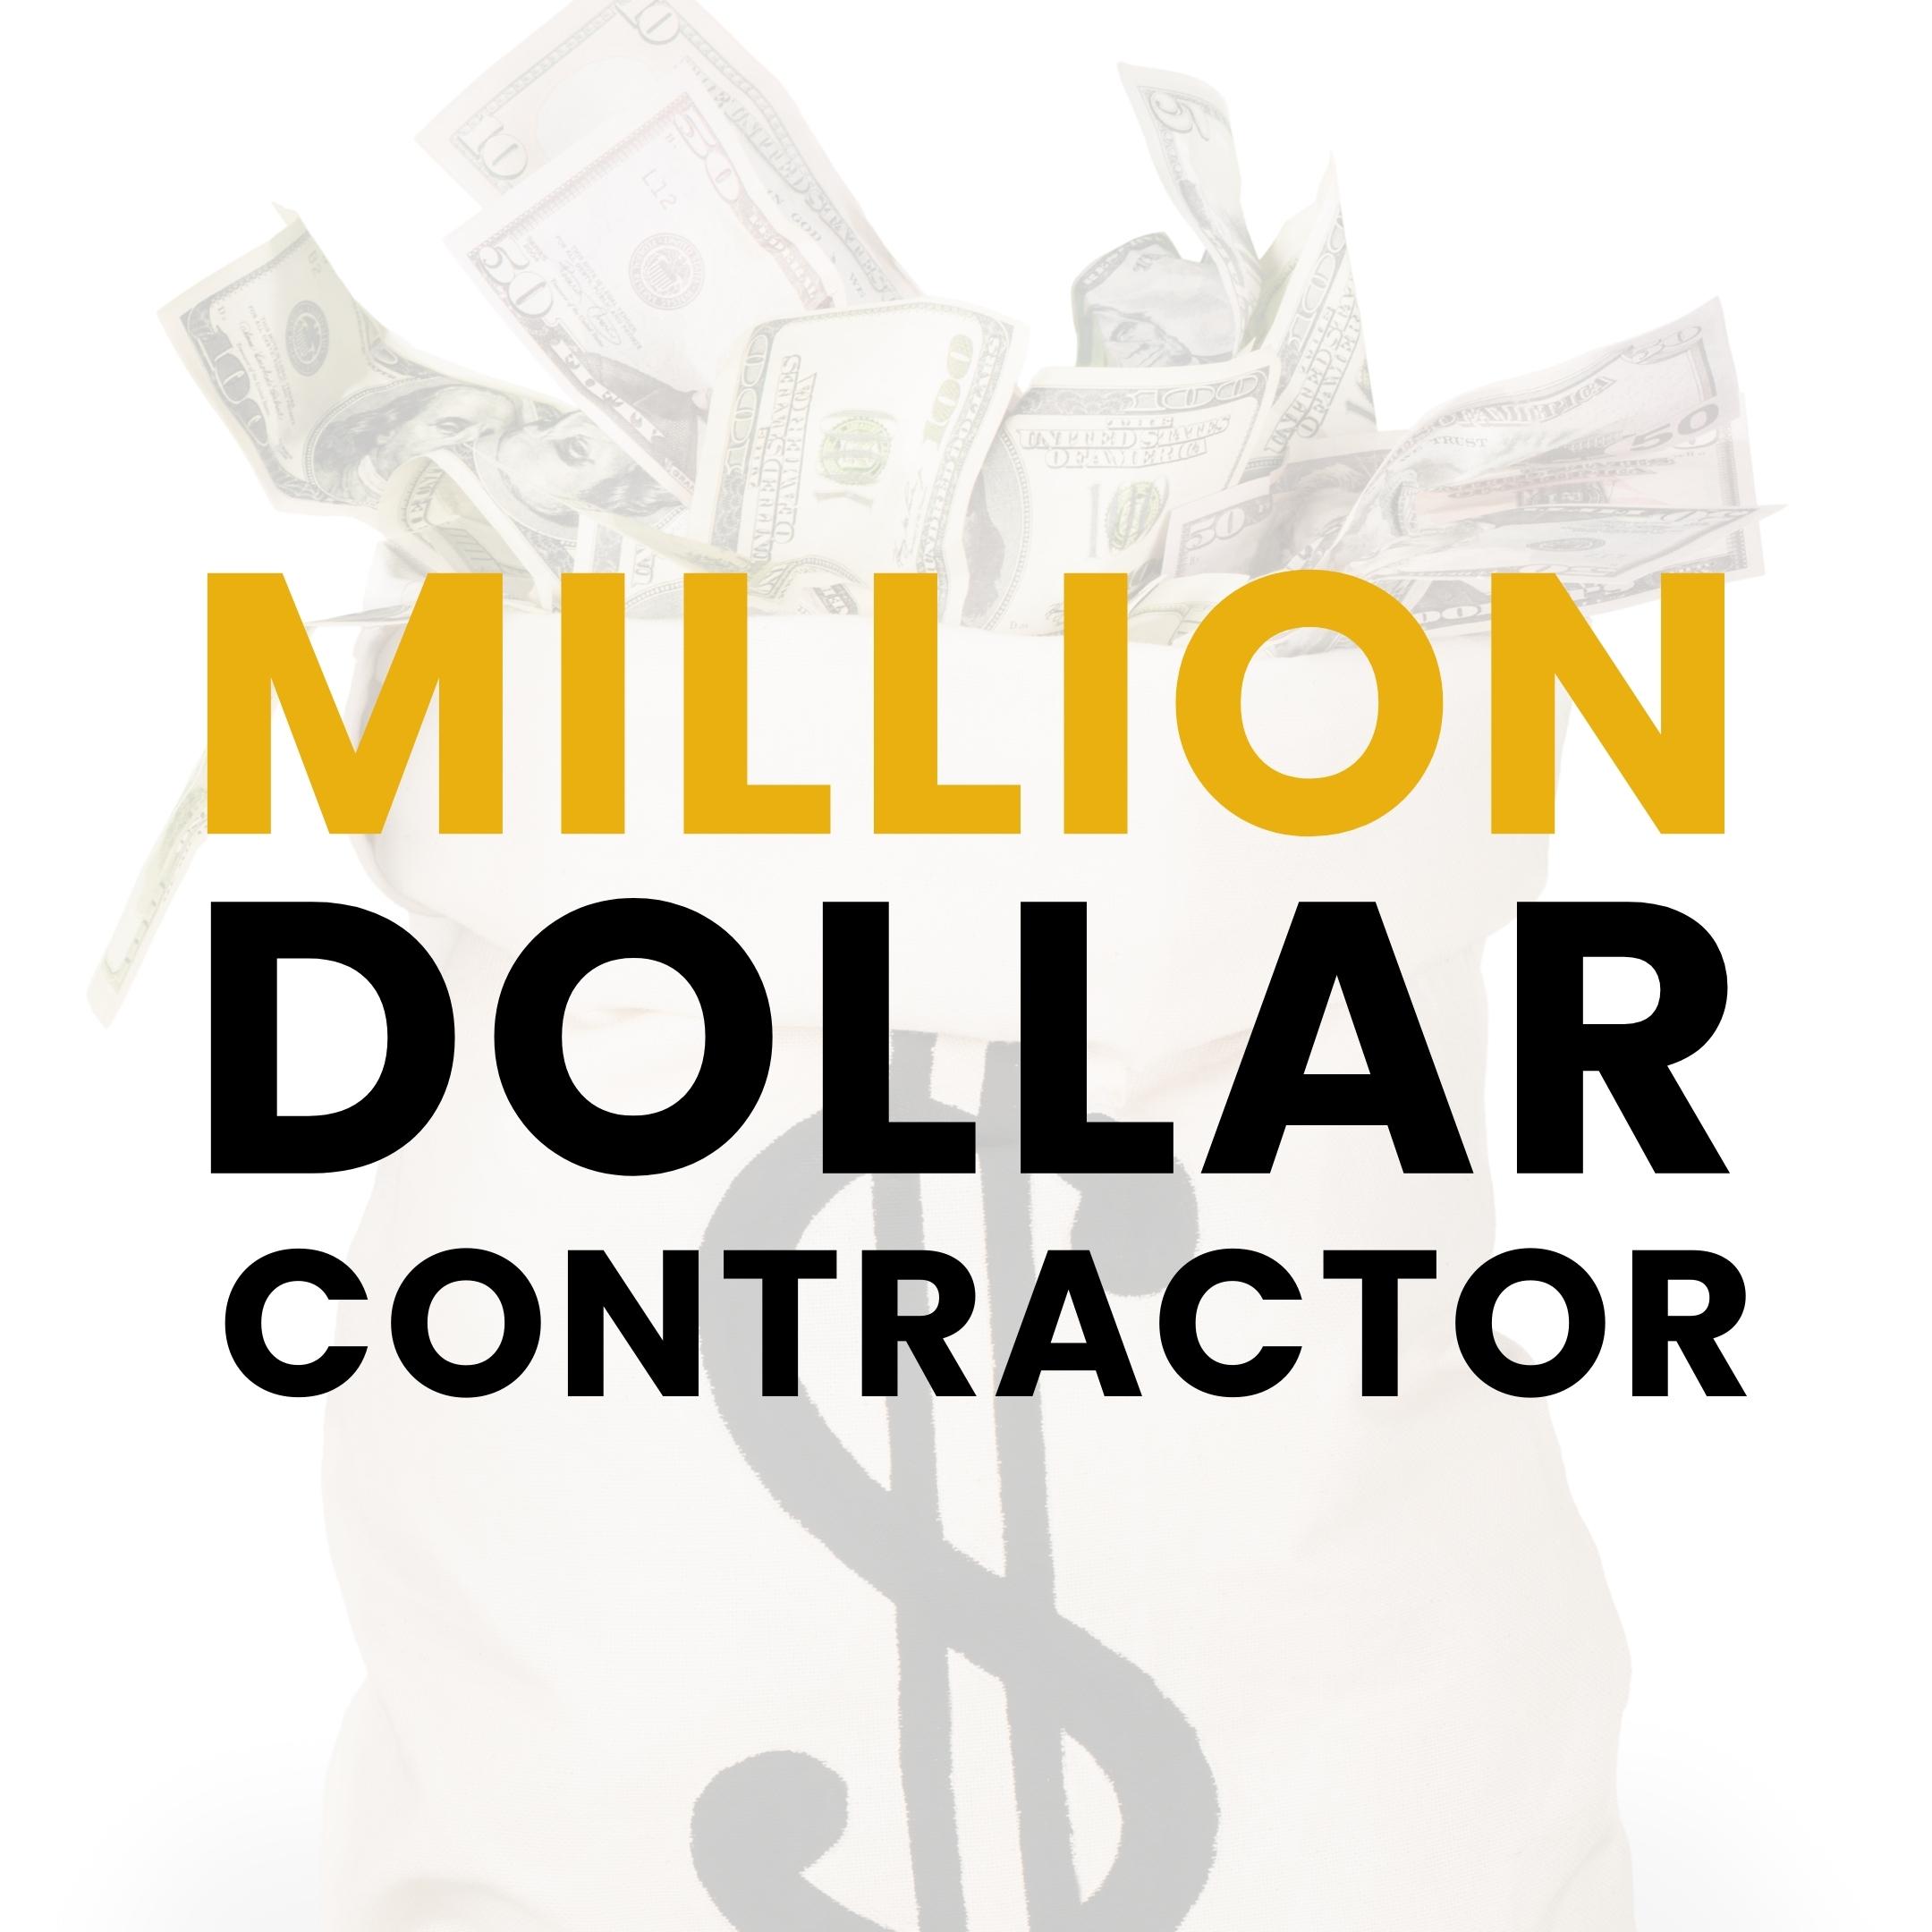 Your MILLION DOLLAR Year With Government Contracts Felicia Streeter